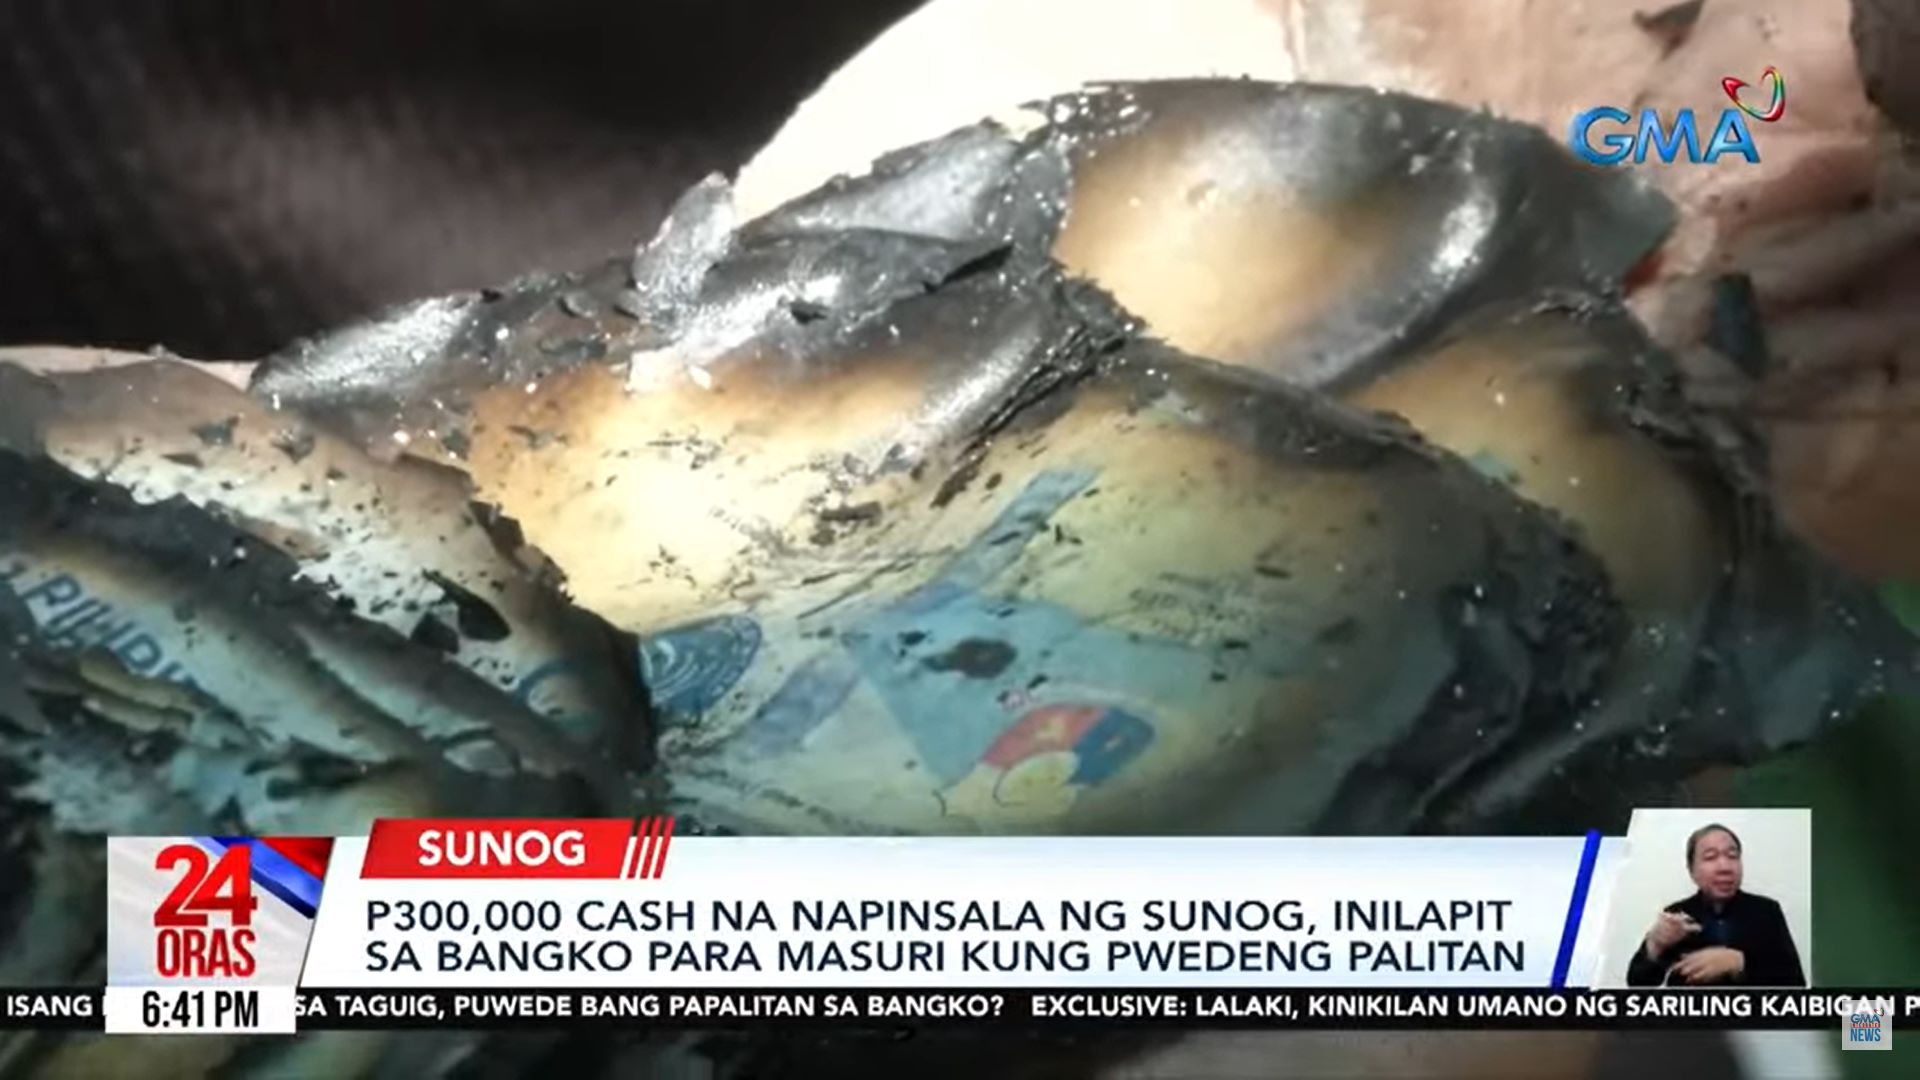 will bsp replace burnt p300k cash of taguig fire victim?